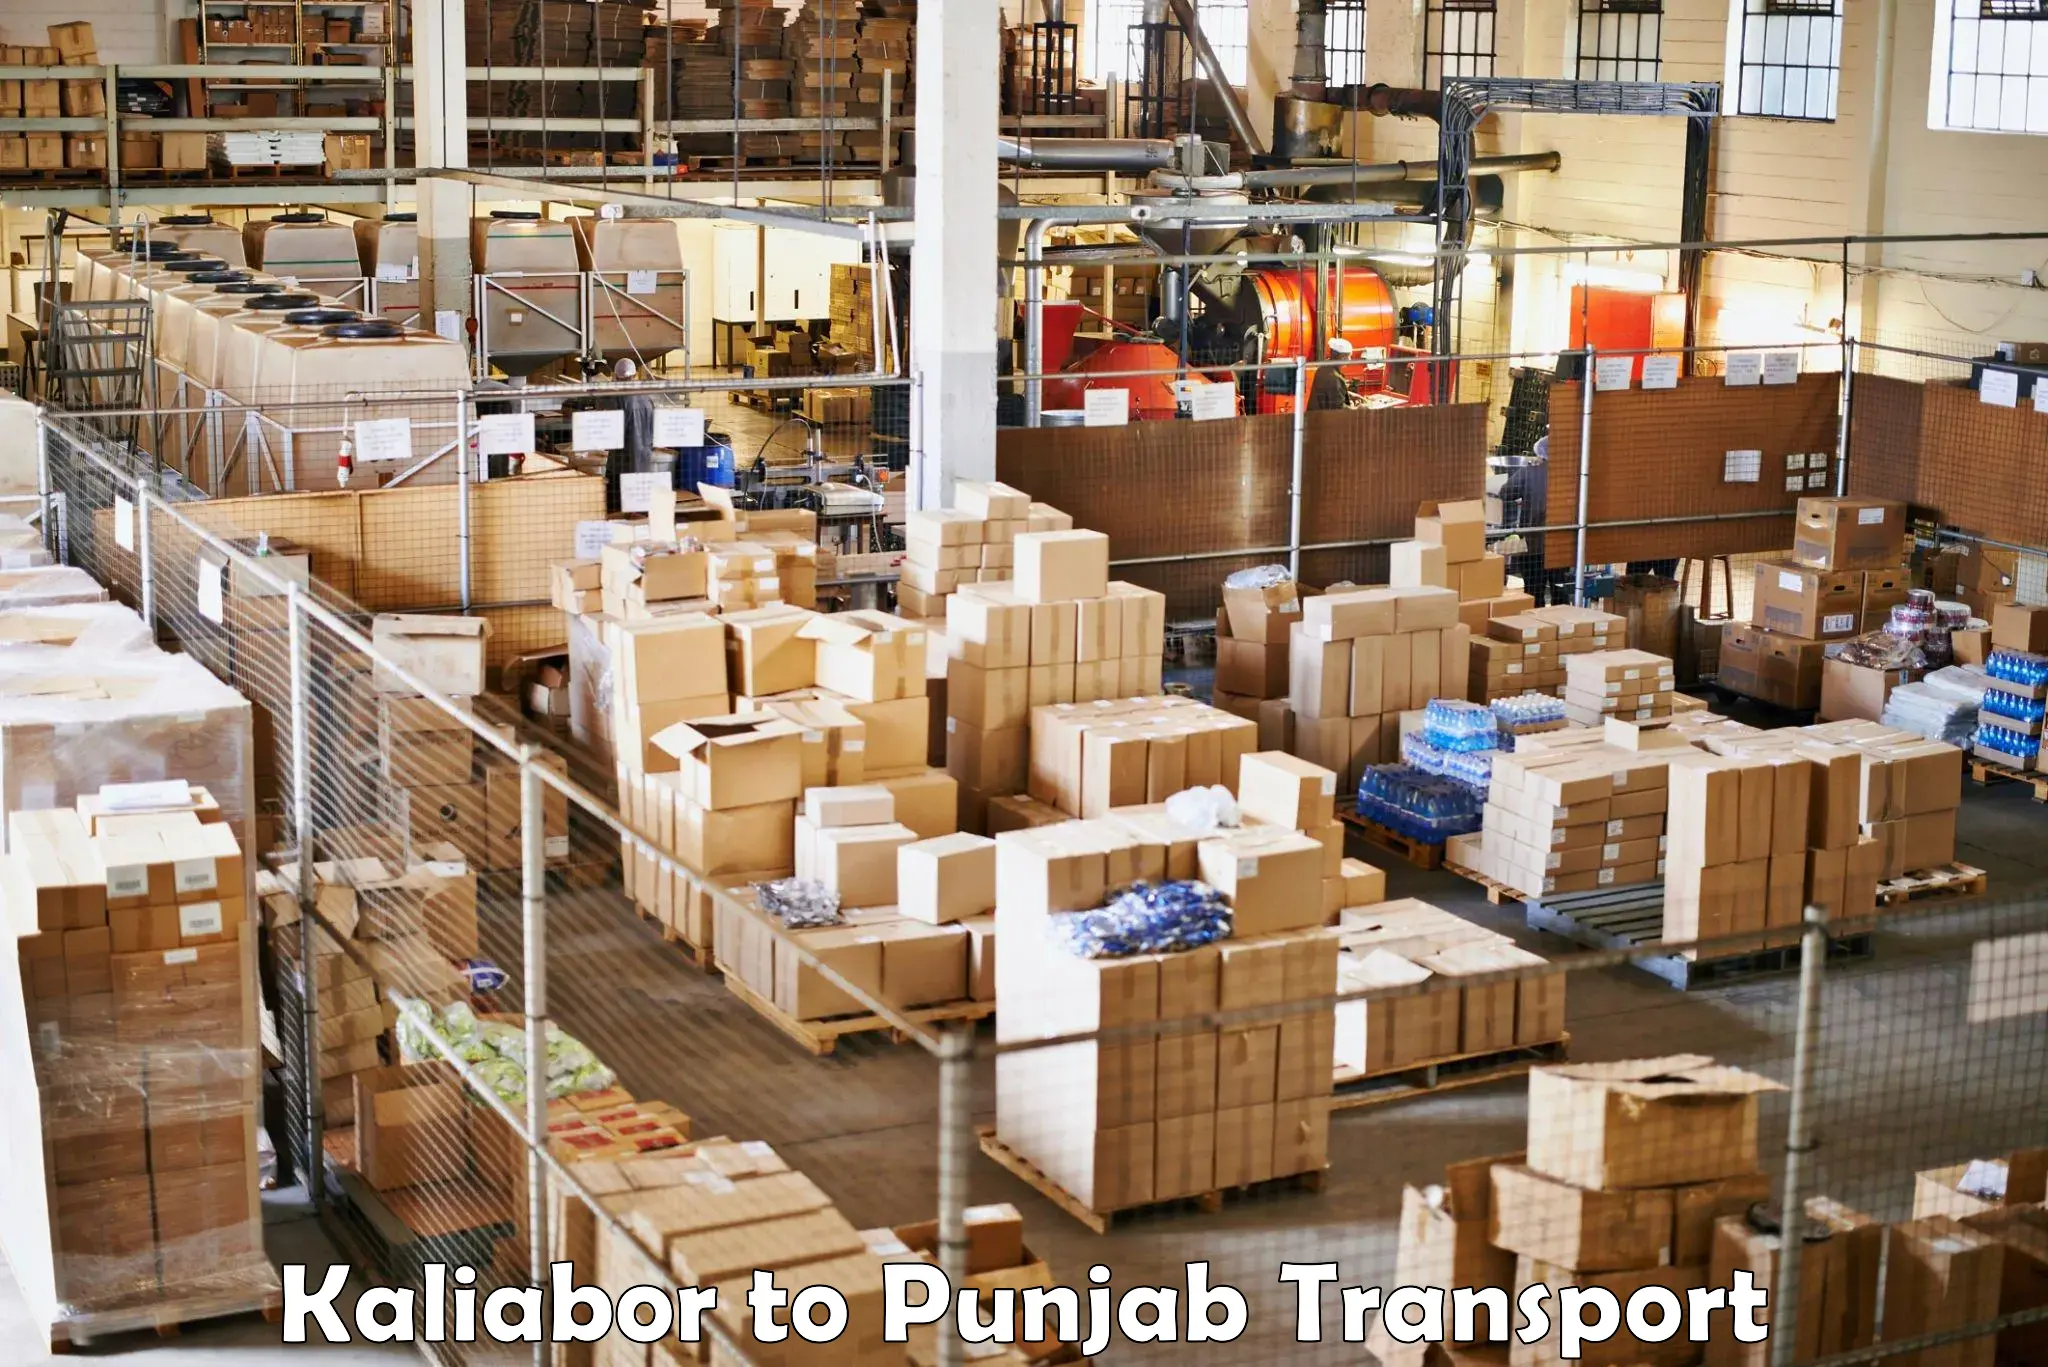 Part load transport service in India Kaliabor to Ludhiana